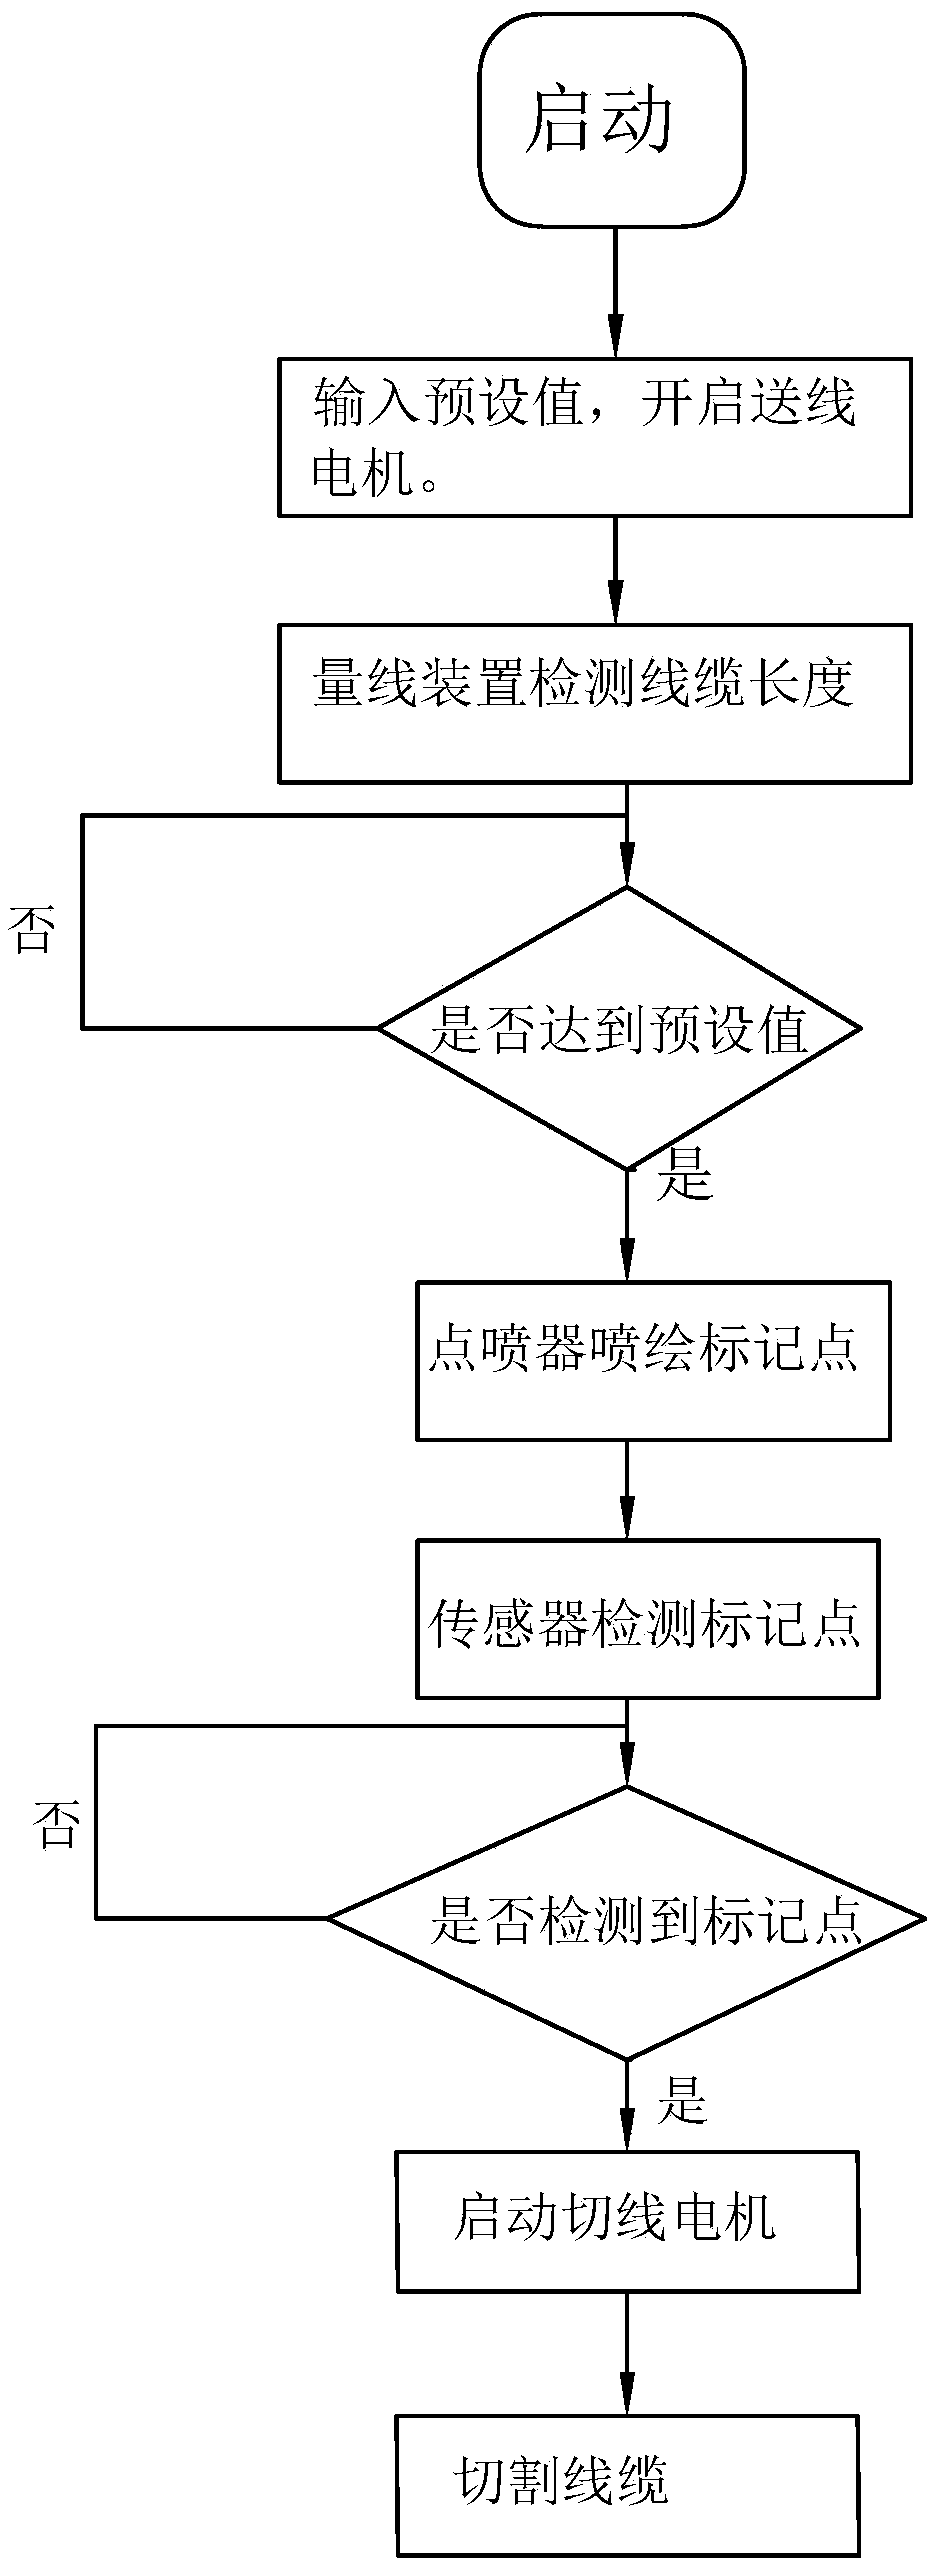 Information control system of numerical control manufacturing machine tool for assembling cables